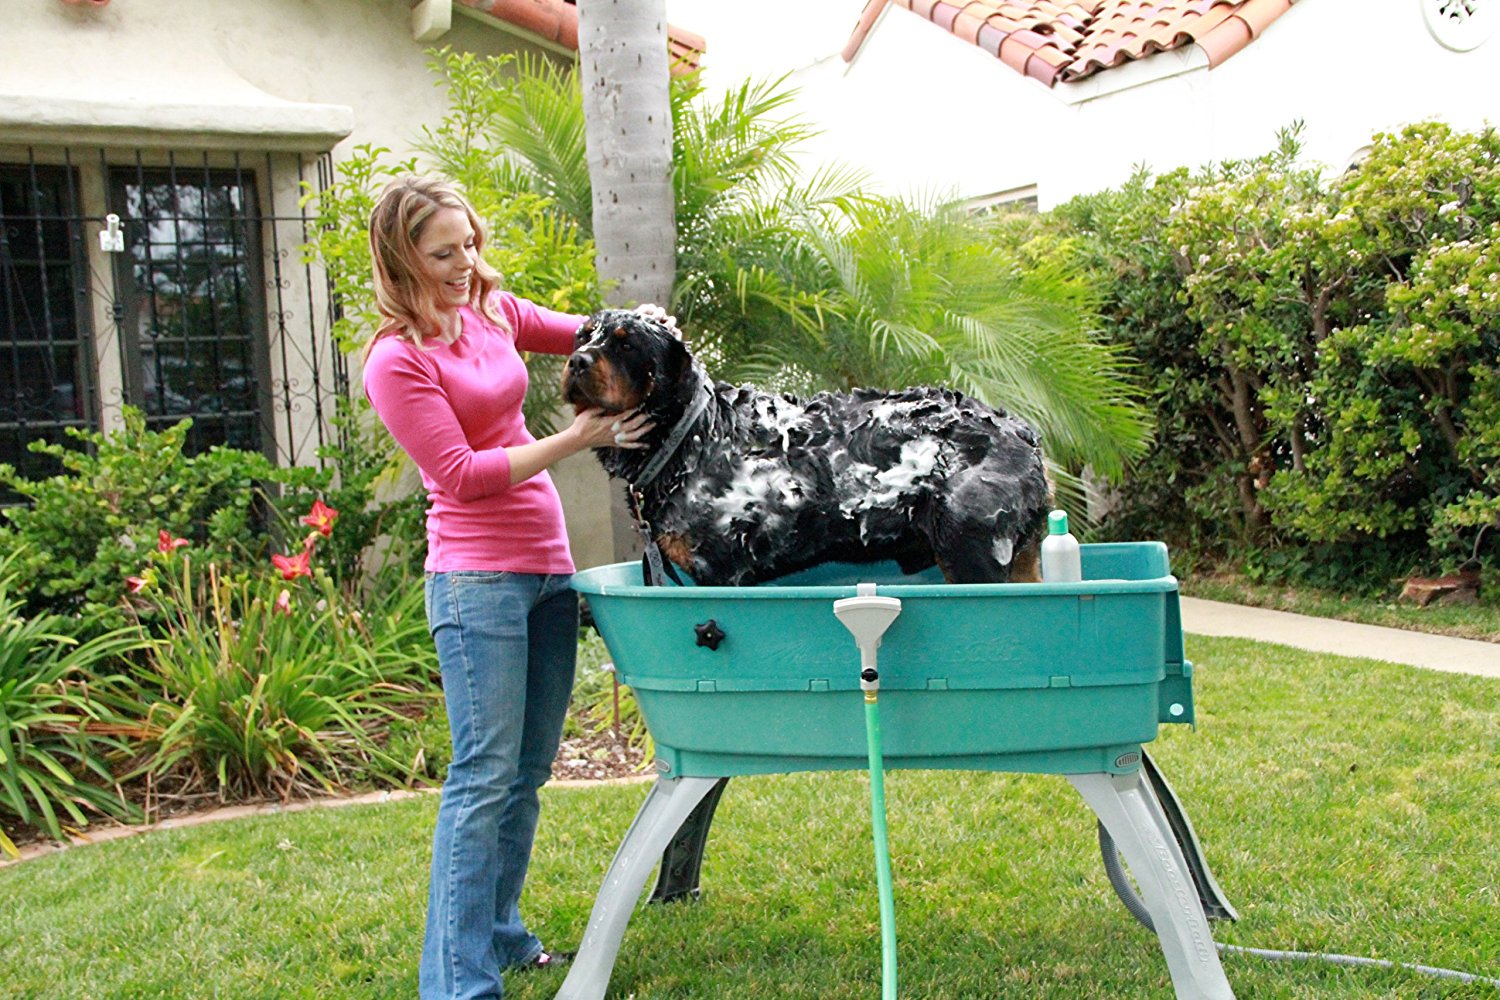 Portable Bathtub For Dogs Discount, 51% OFF | www.hcb.cat